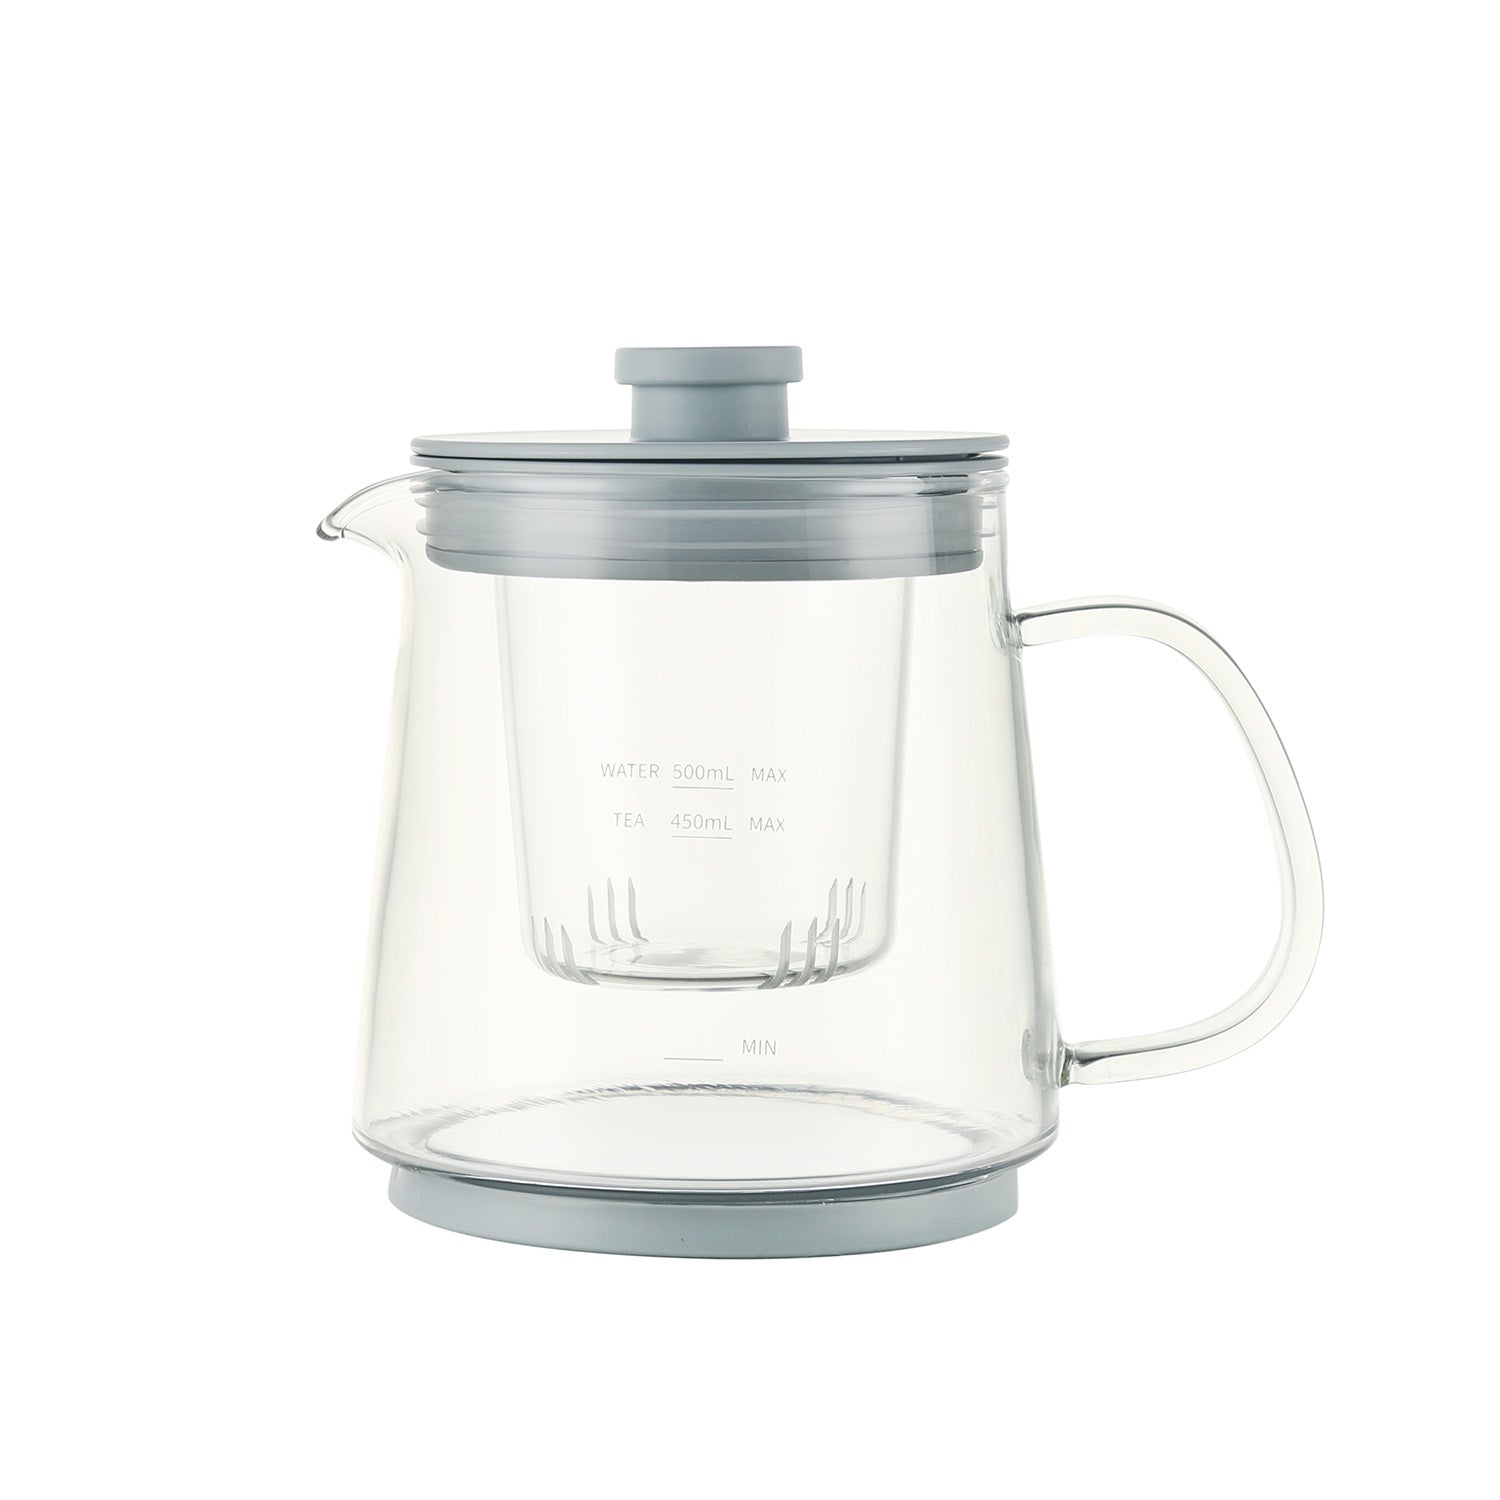 BRUNO Compact Kettle - Blue Gray